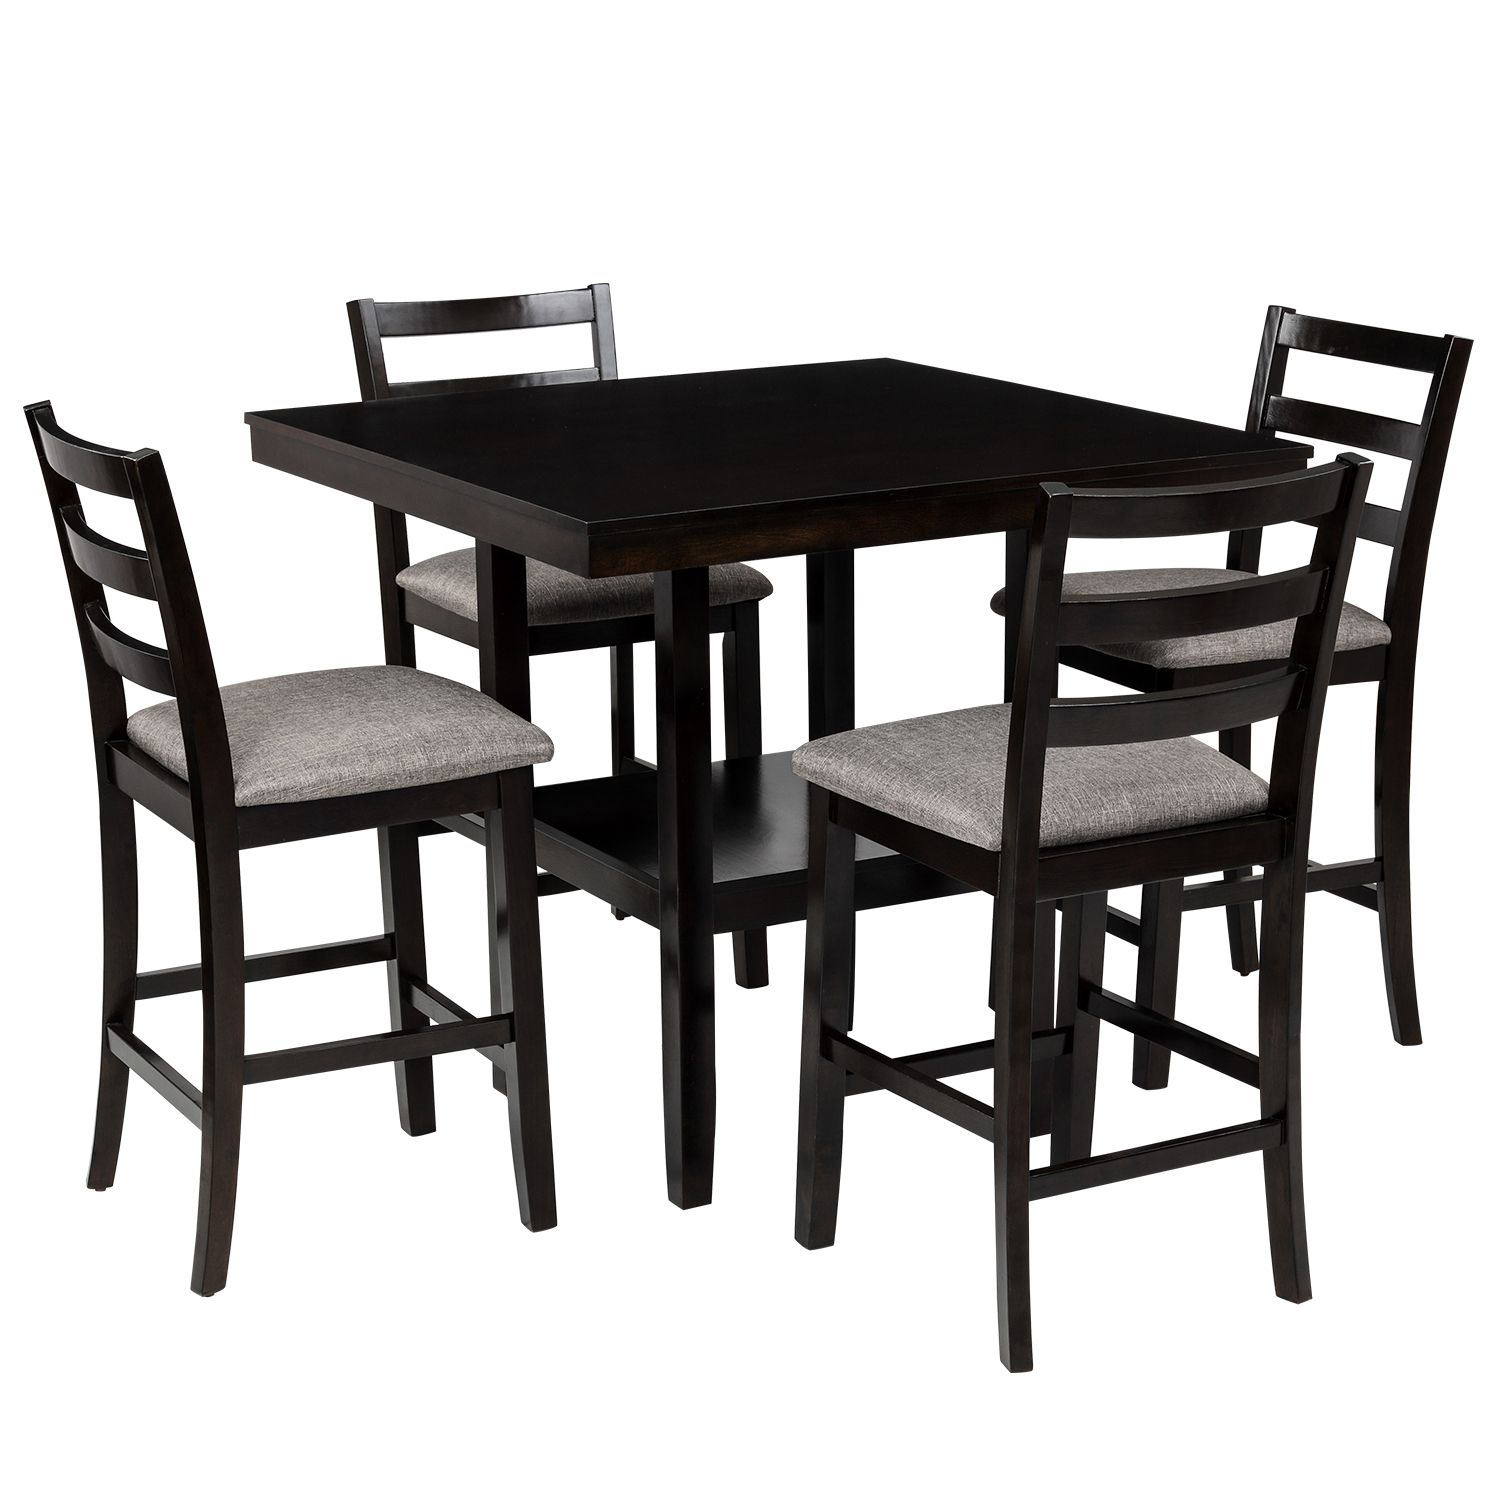 5 Piece Counter Height Wooden Dining Set With Bar Table And 4 Chairs Within 5 Piece Cafe Dining Sets (View 7 of 15)